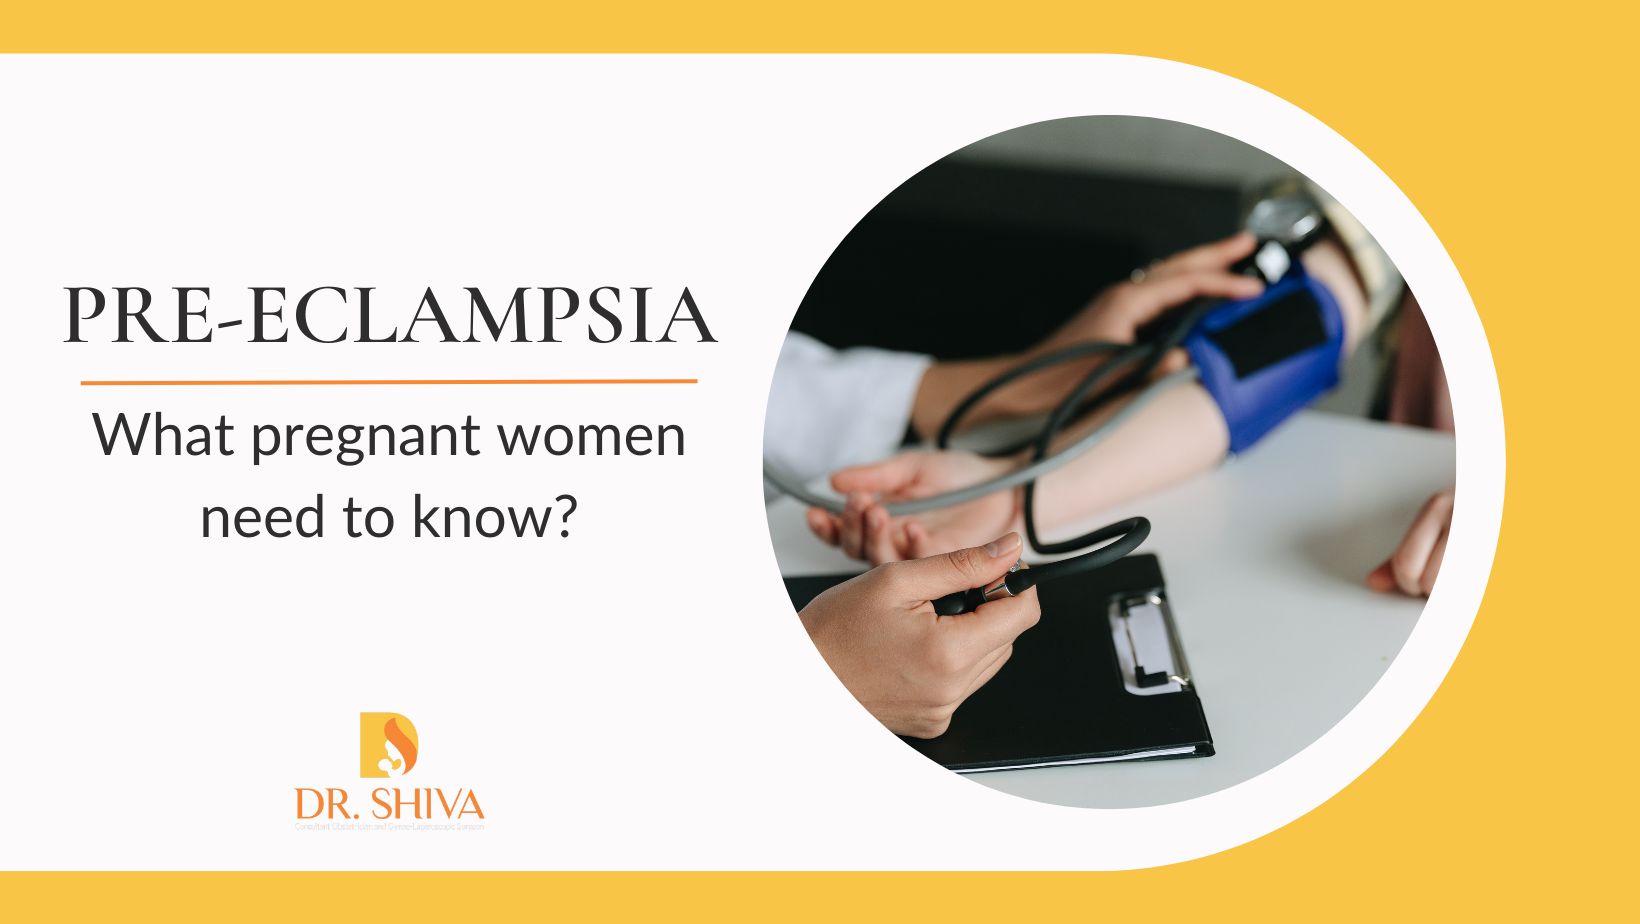 Pre-eclampsia: What Pregnant Women Need to Know